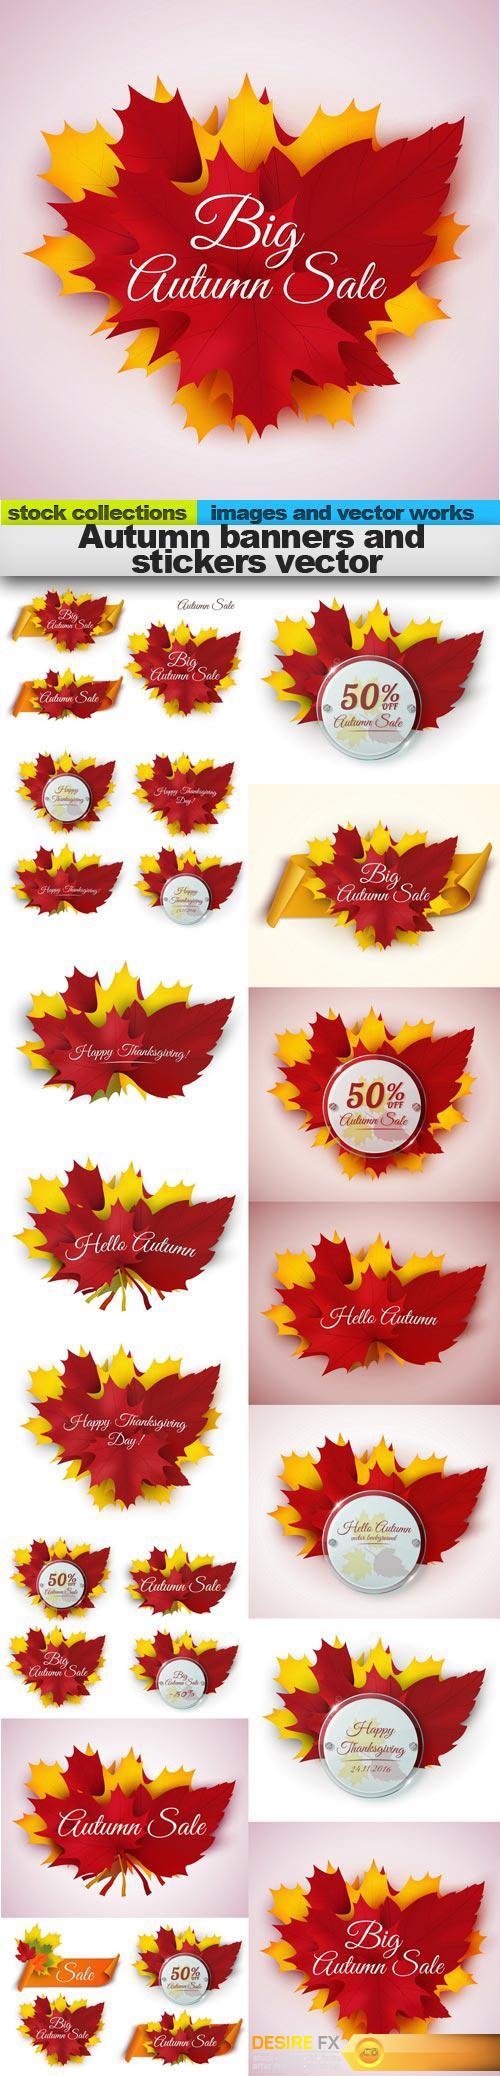 Autumn banners and stickers vector, 15 x EPS